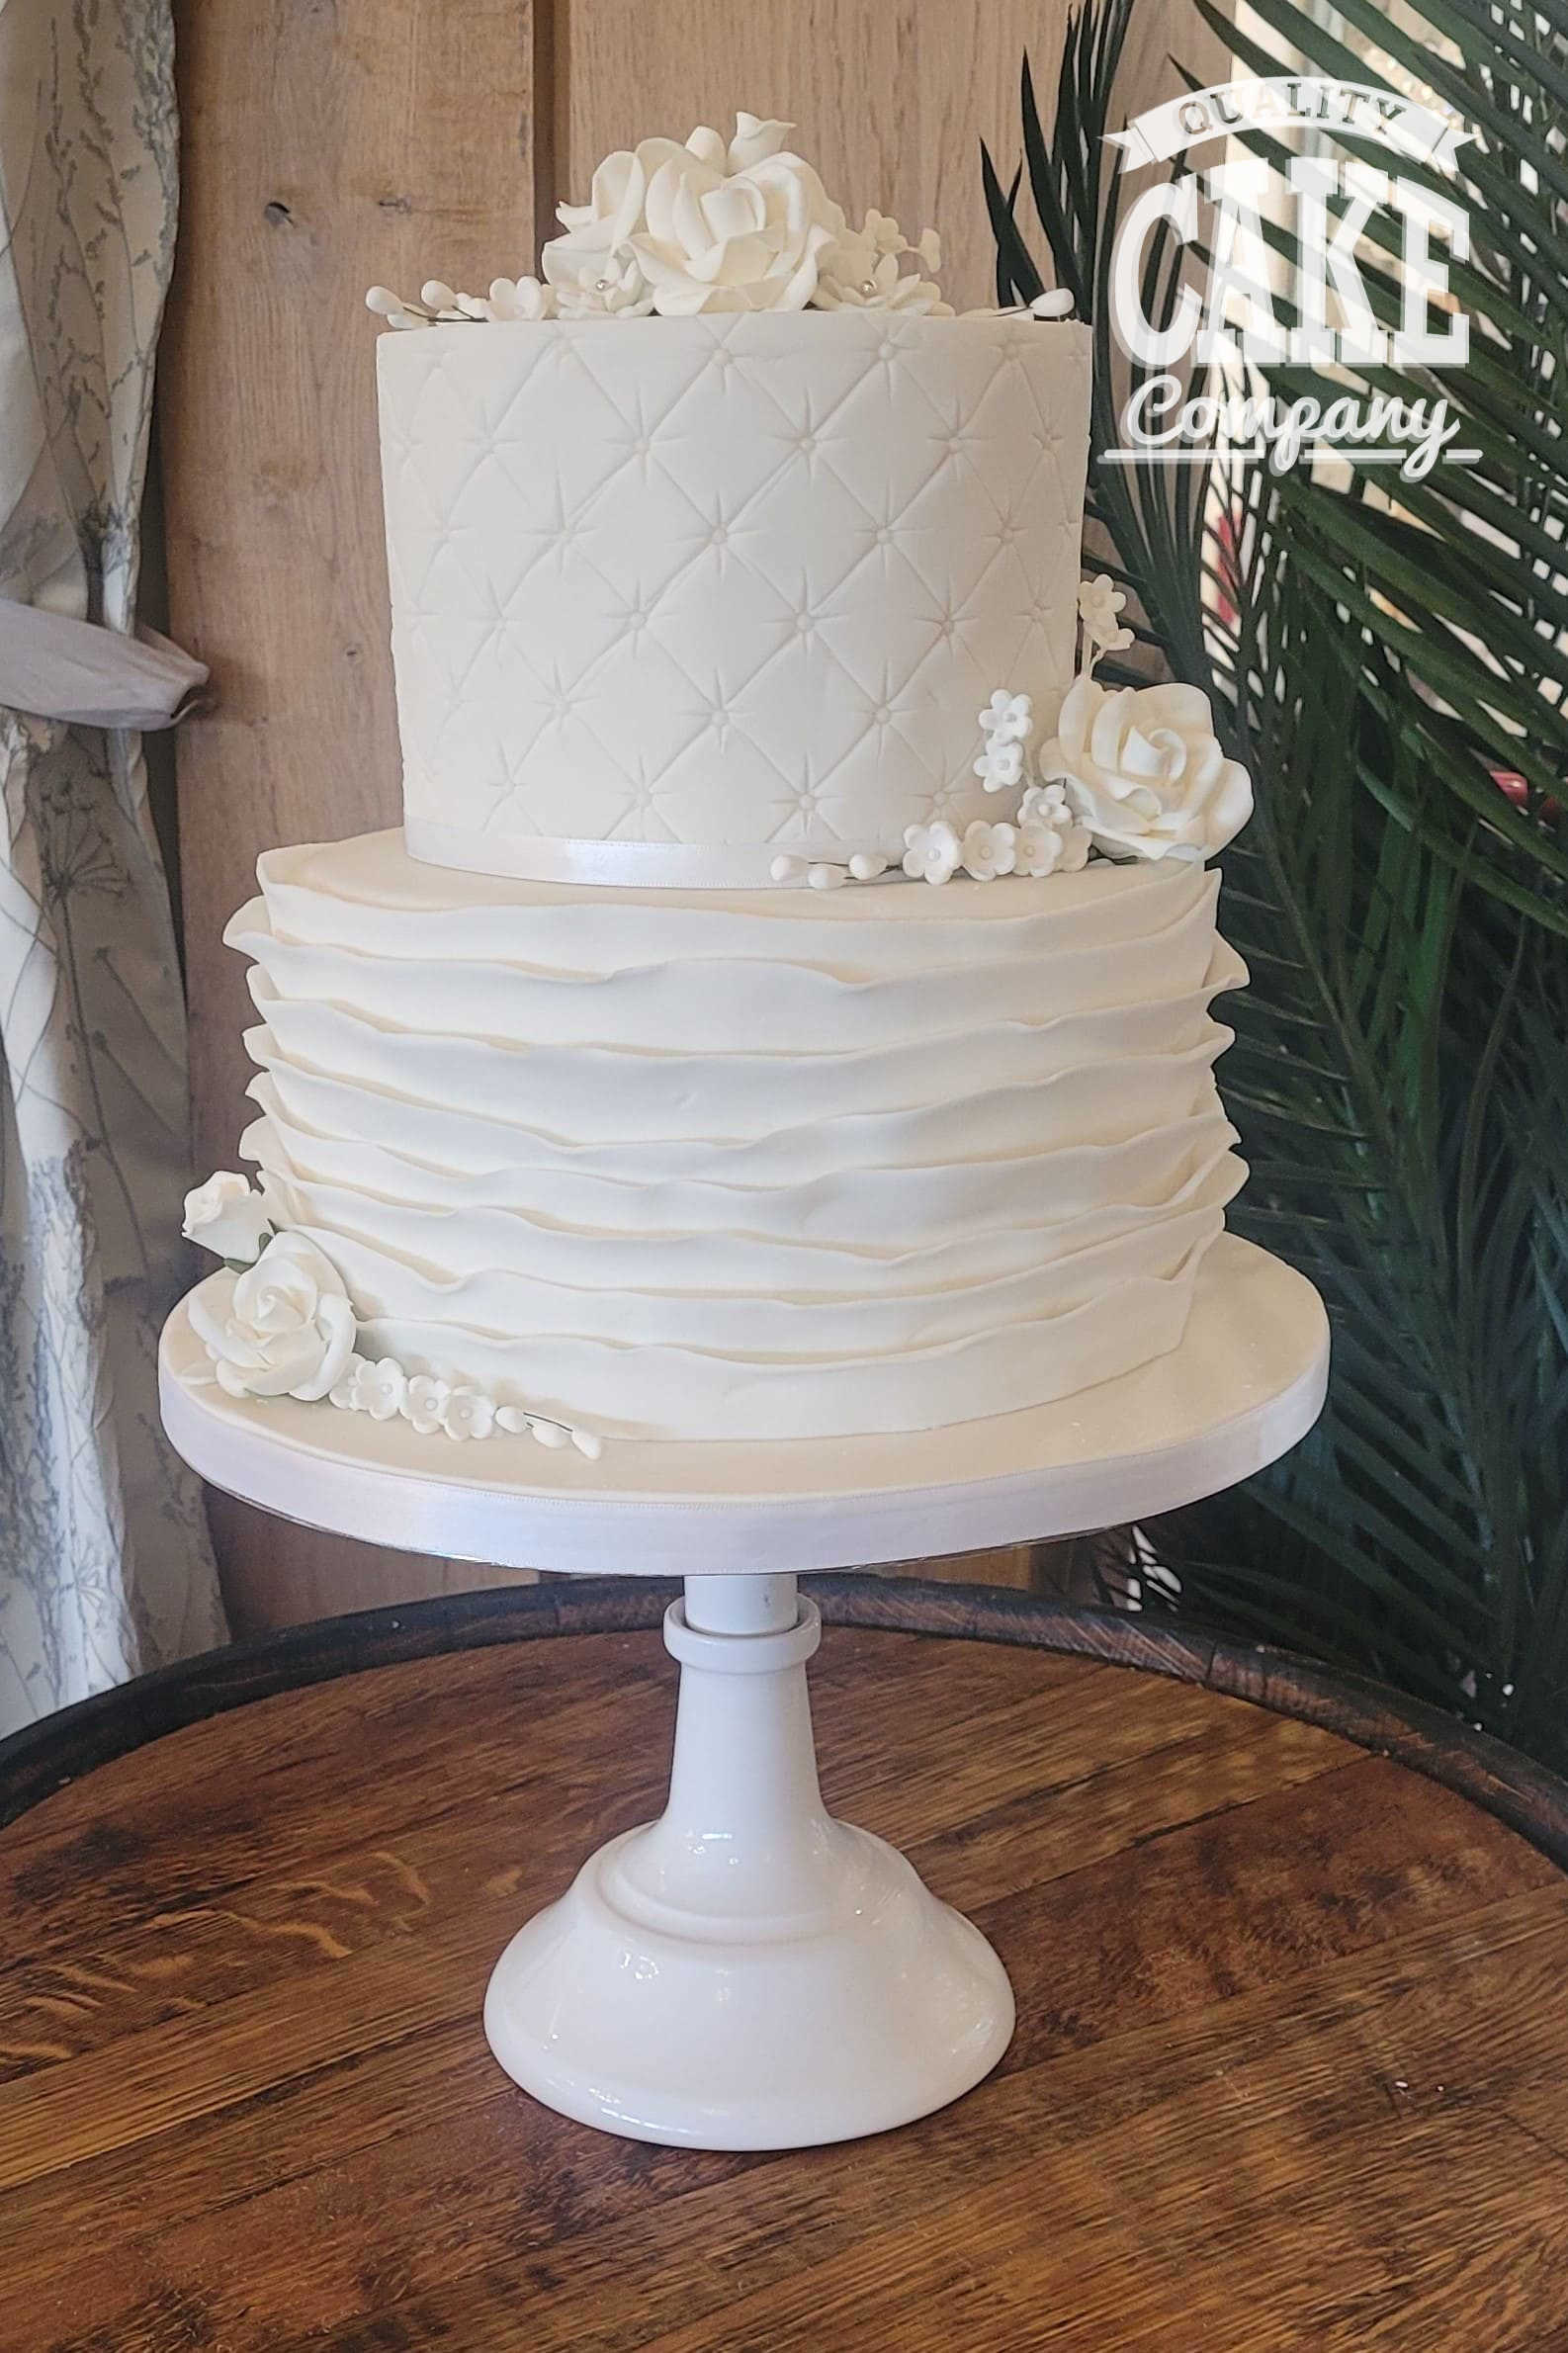 The Cake Bake Shop 2 Tier Special Occasion Cake (16-22 Servings) | Costco